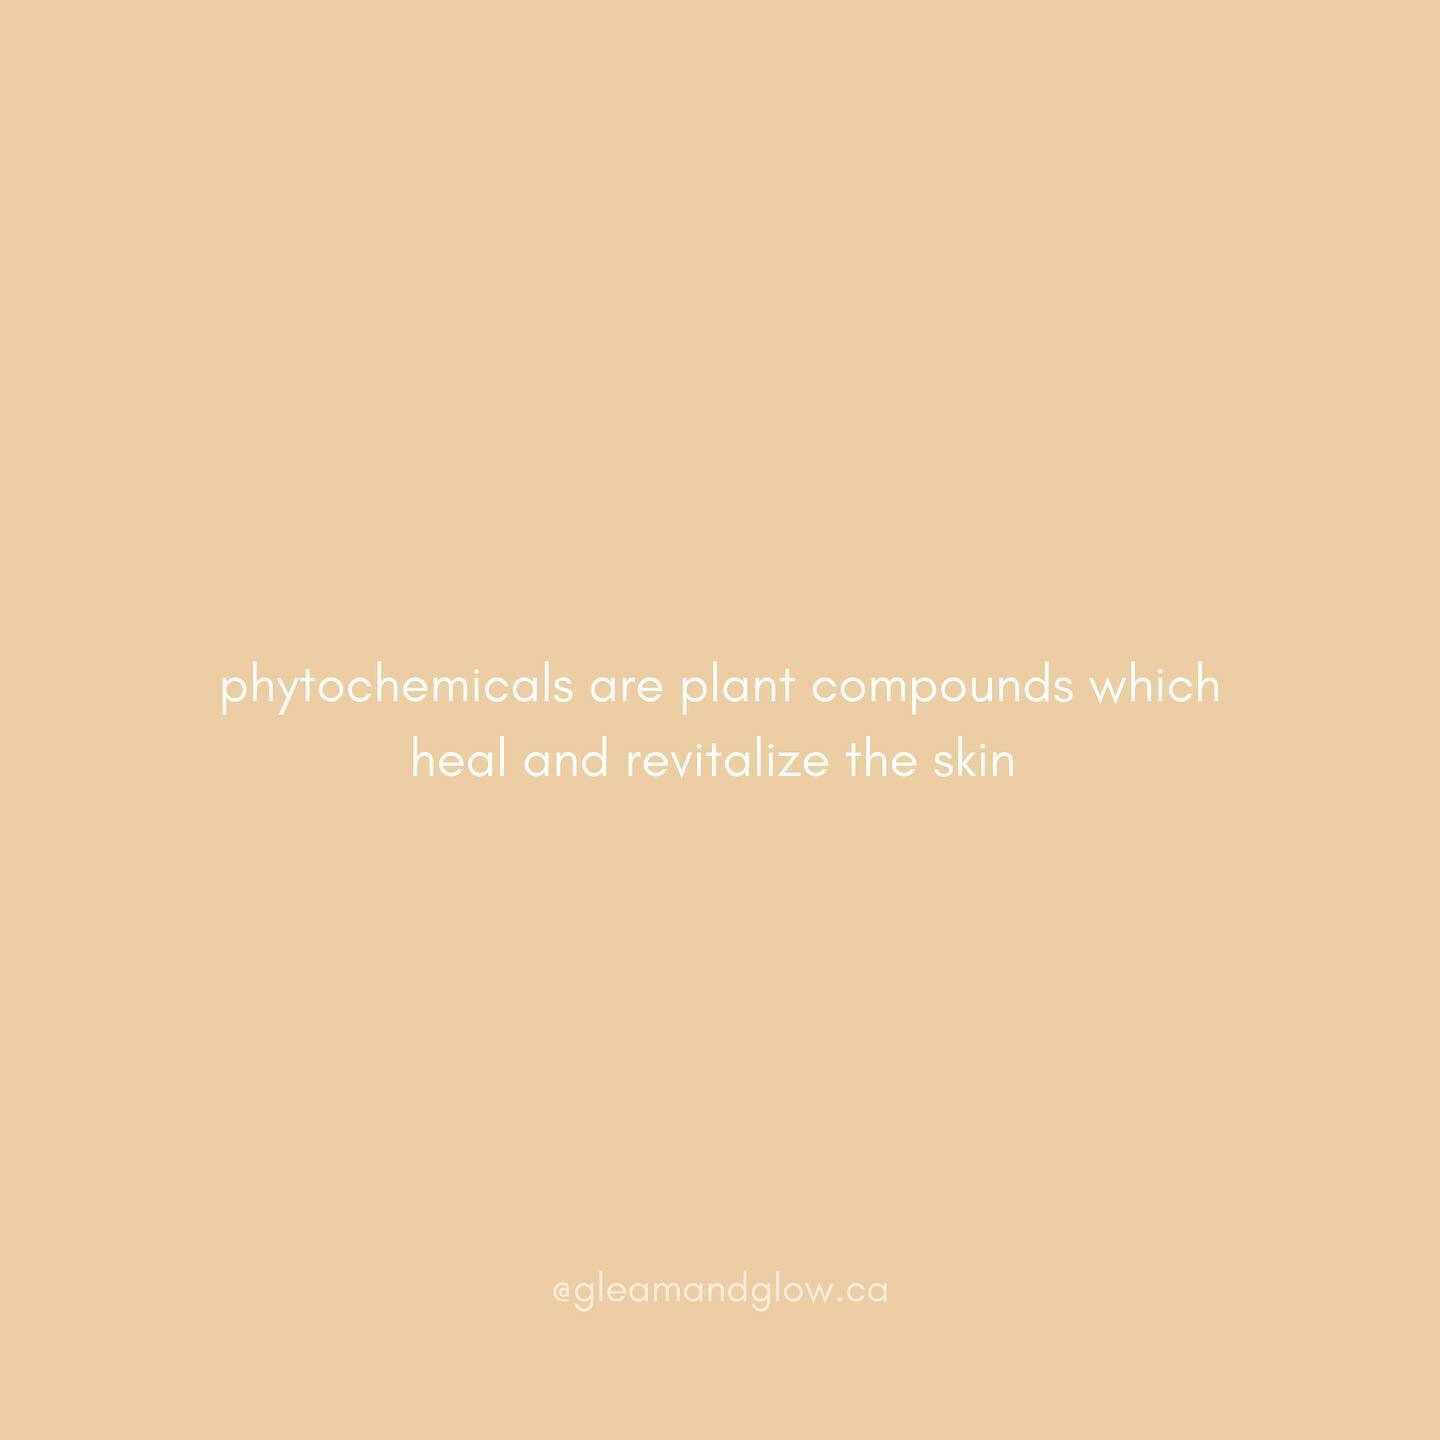 ℙ𝕙𝕪𝕥𝕠𝕔𝕙𝕖𝕞𝕚𝕔𝕒𝕝𝕤 🌱

What are they and what is their role in skincare?

Flavonoids, polyphenols, and flavanols are all subgroup examples of phytochemicals 🔬

Phyto (phyto meaning plant) chemicals are powerful plant constituents with 